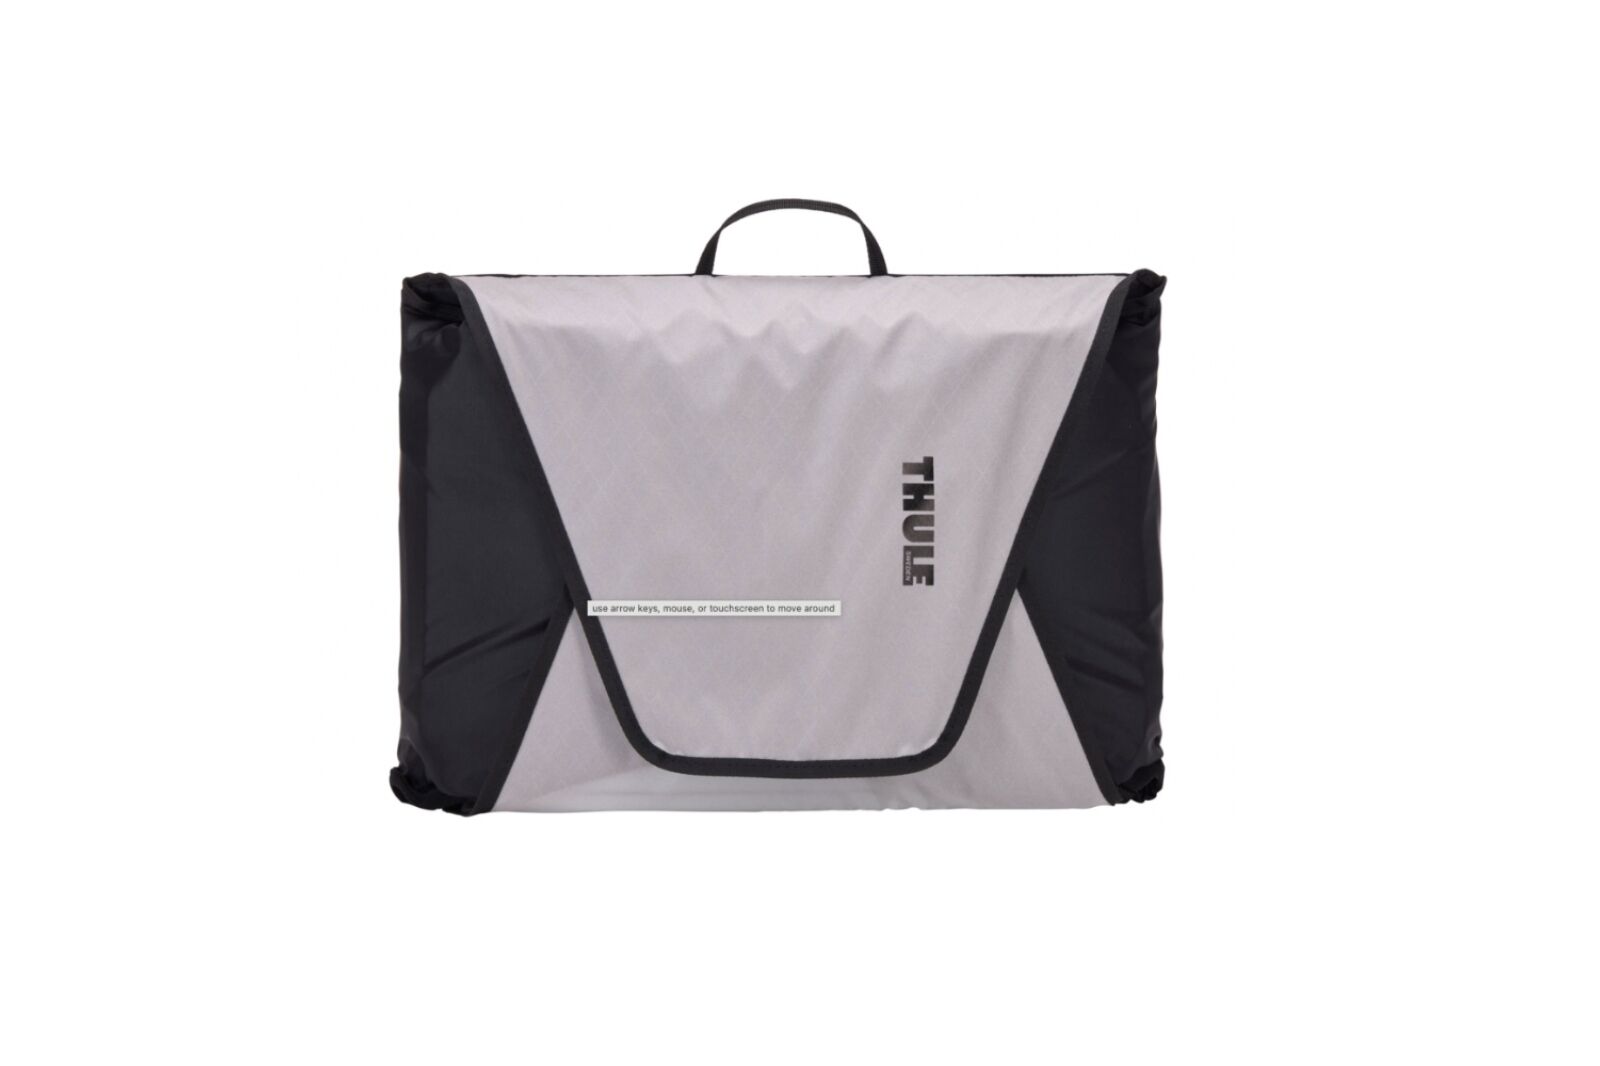 Thule Garment Folders two pack of packing organizers